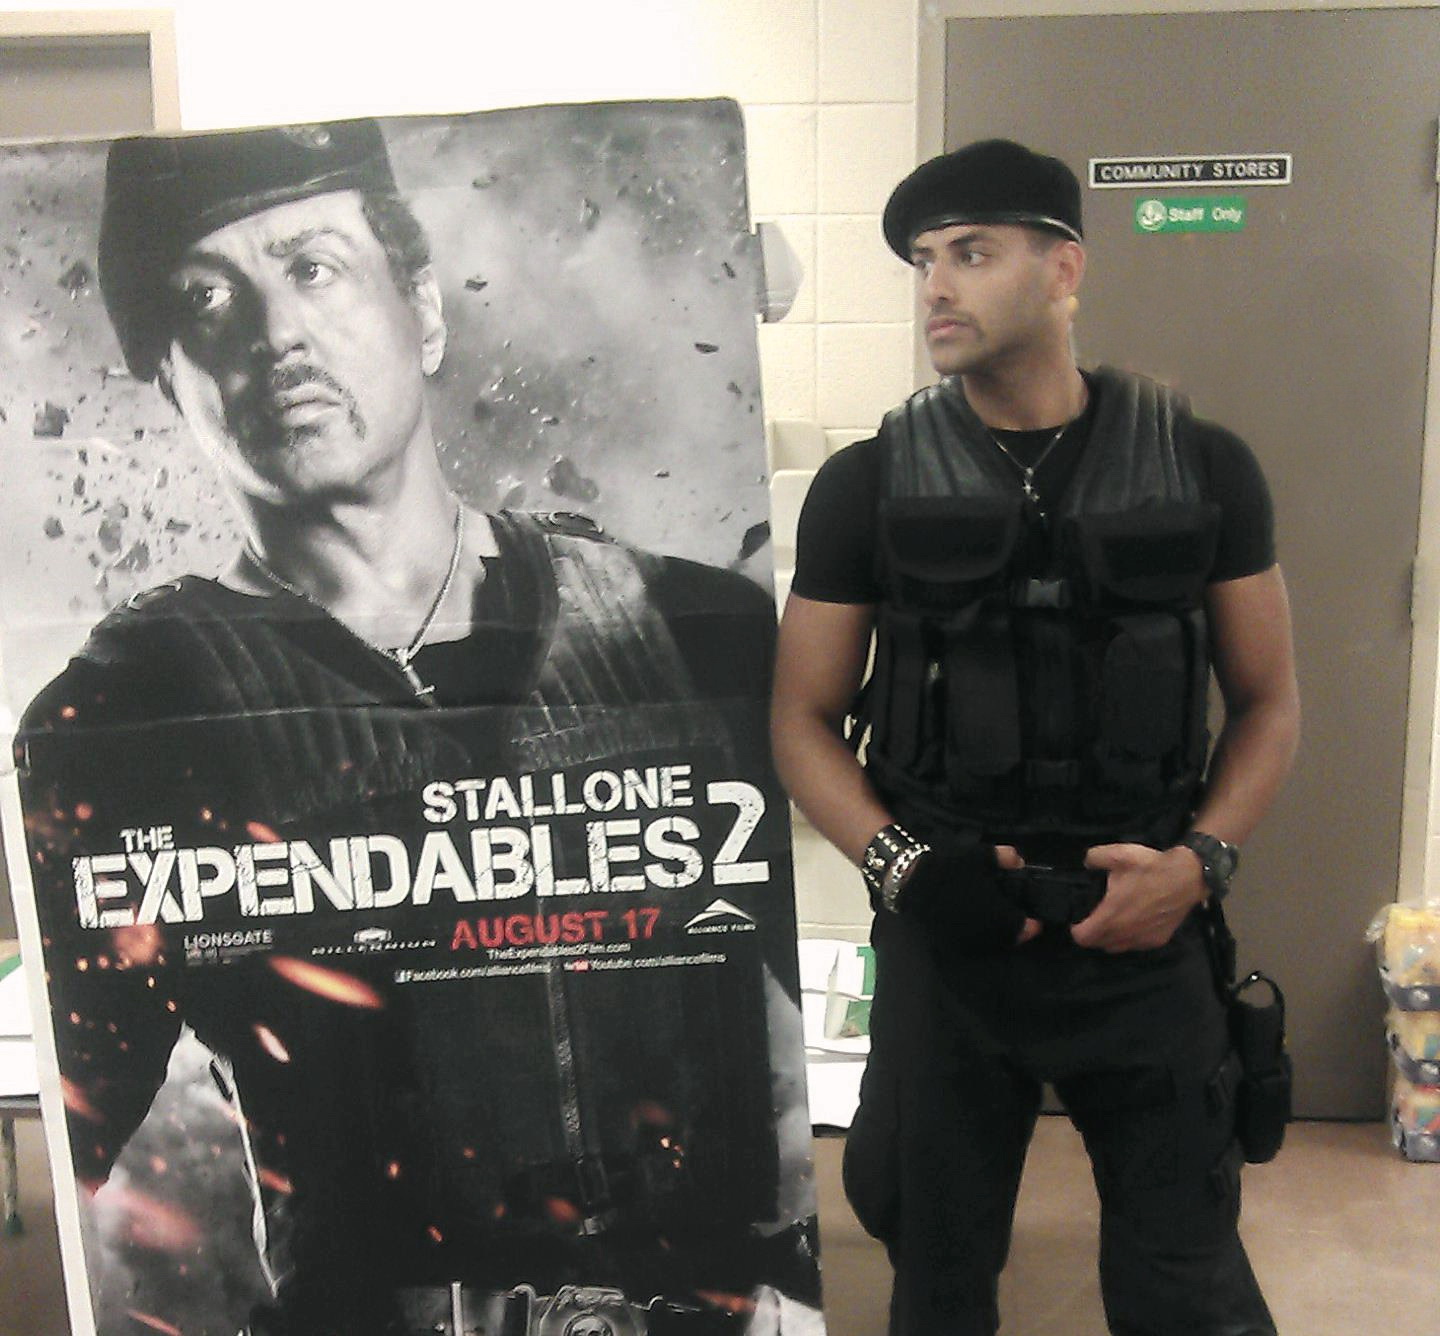 Expendables 2 Act as Stallone